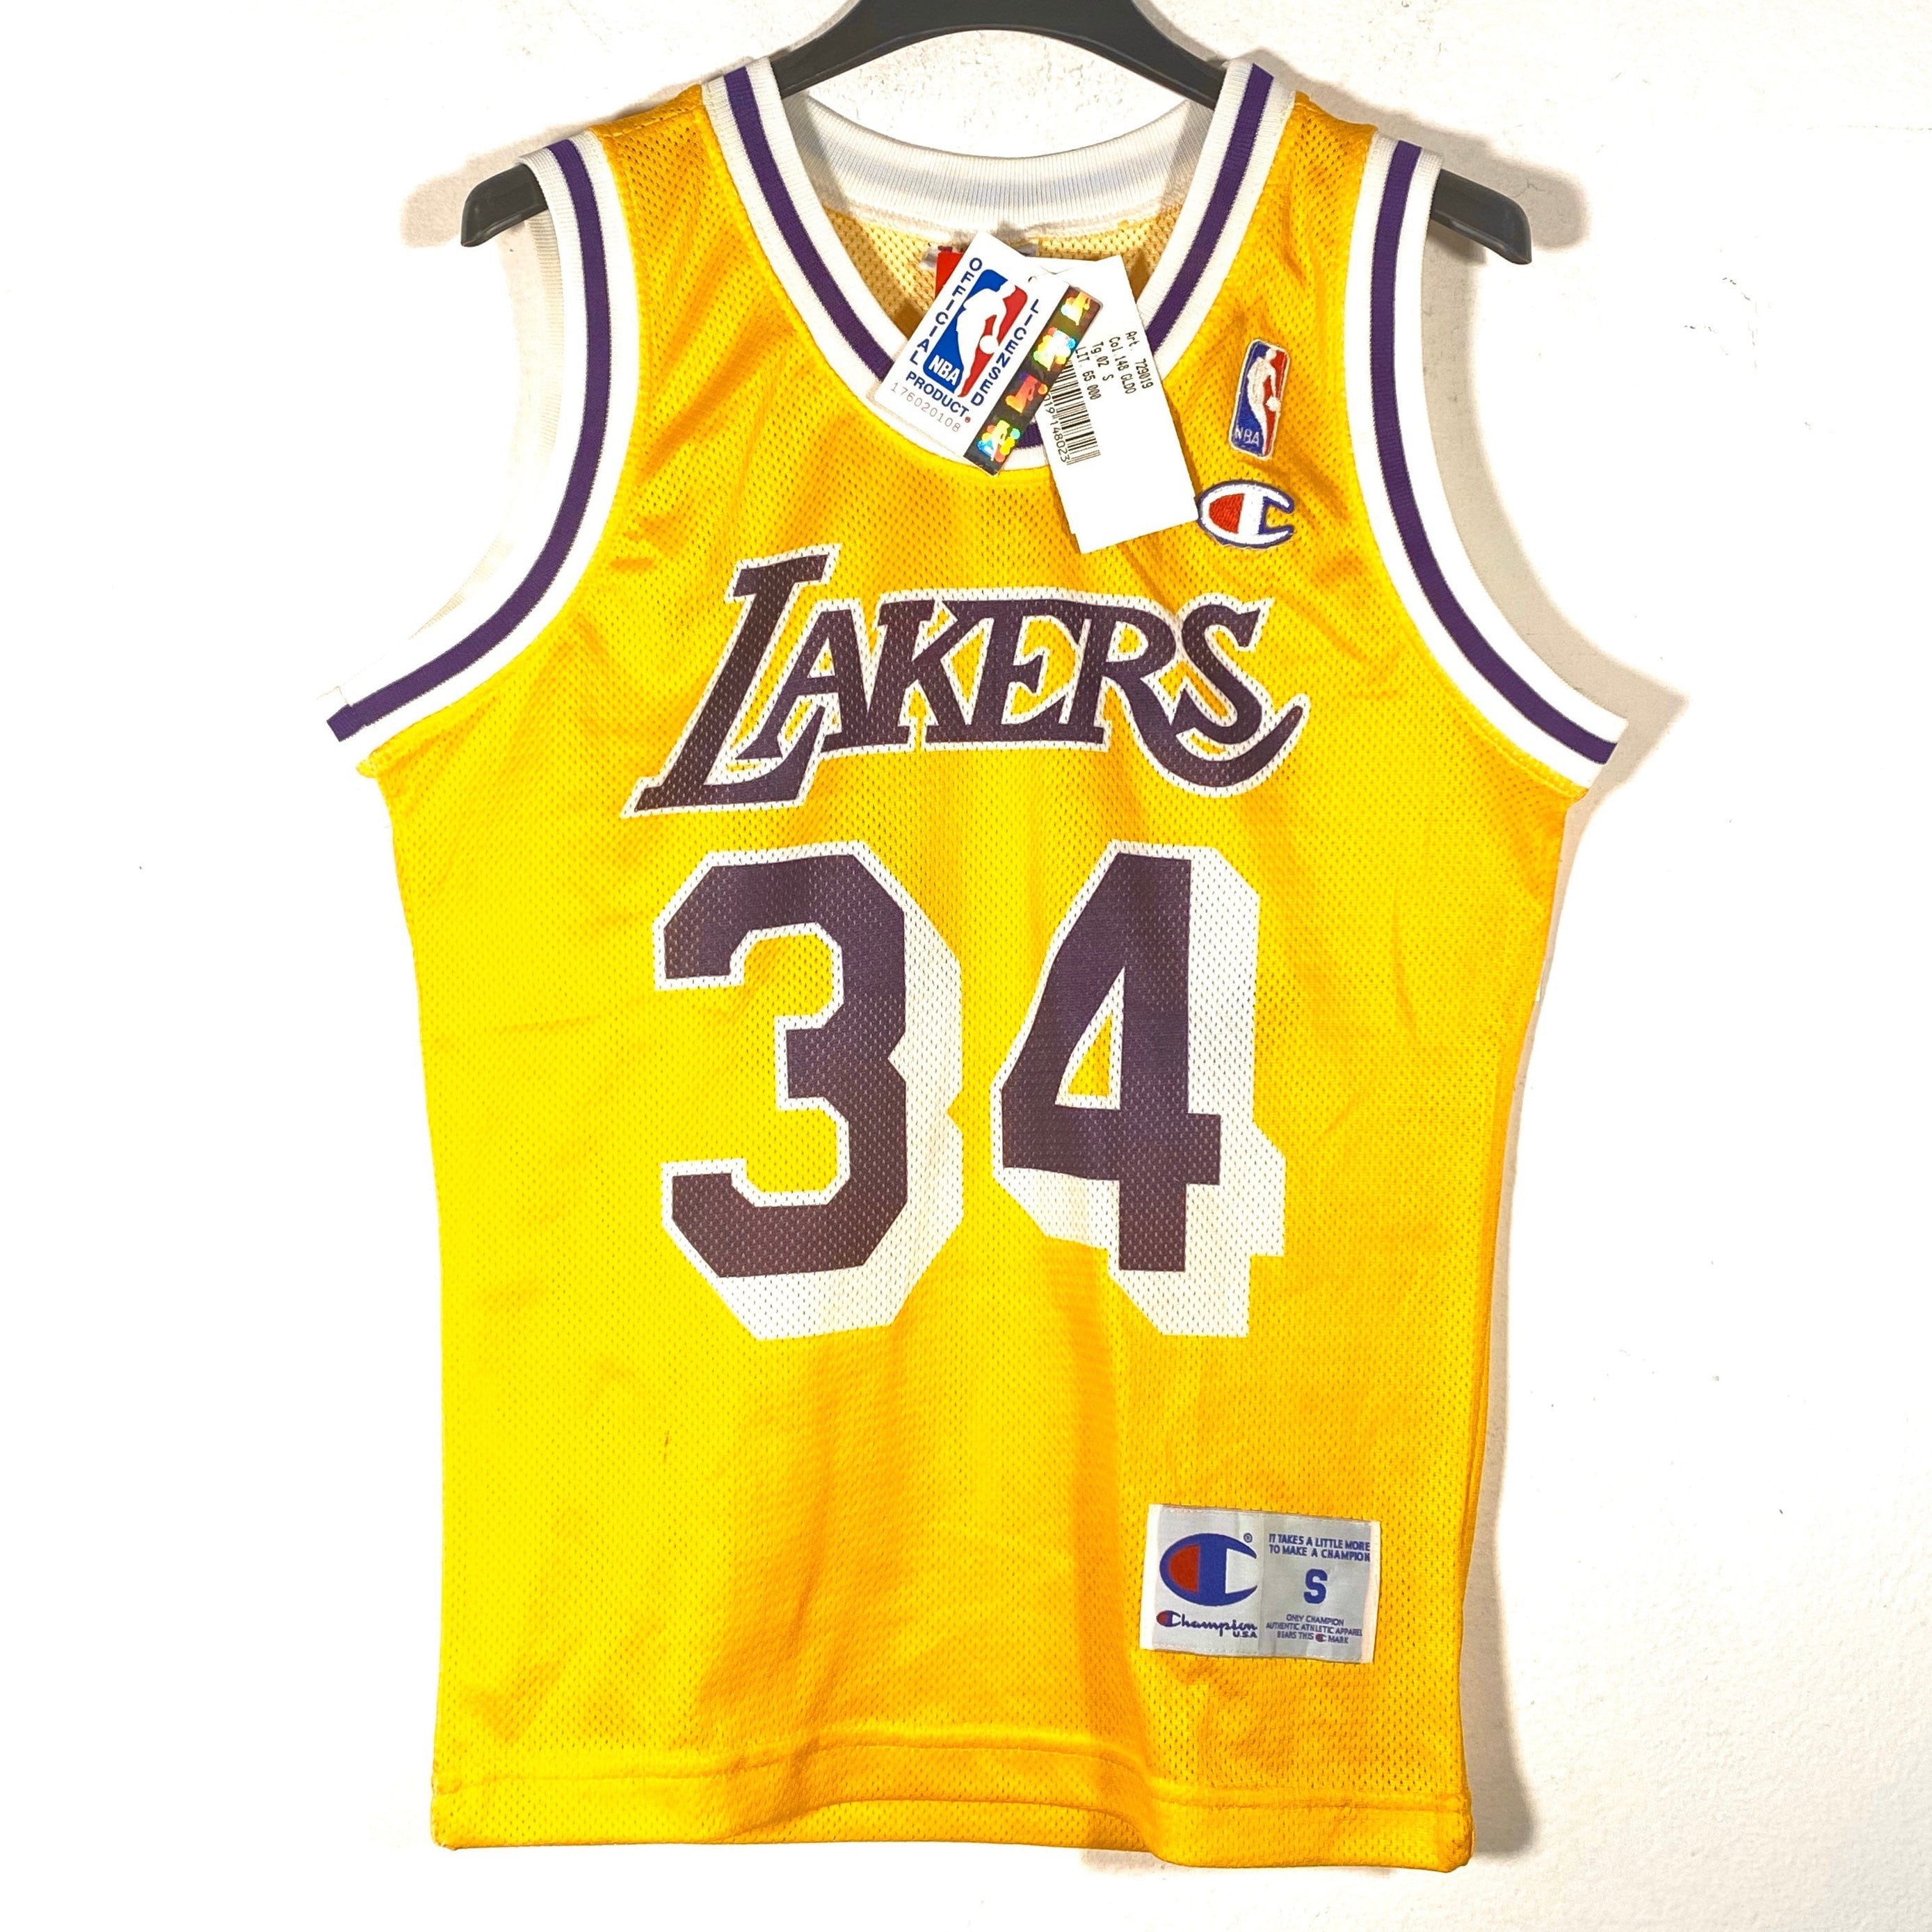 Official Shaquille O'Neal Los Angeles Lakers Jerseys, Showtime City Jersey, Shaquille  O'Neal Showtime Basketball Jerseys